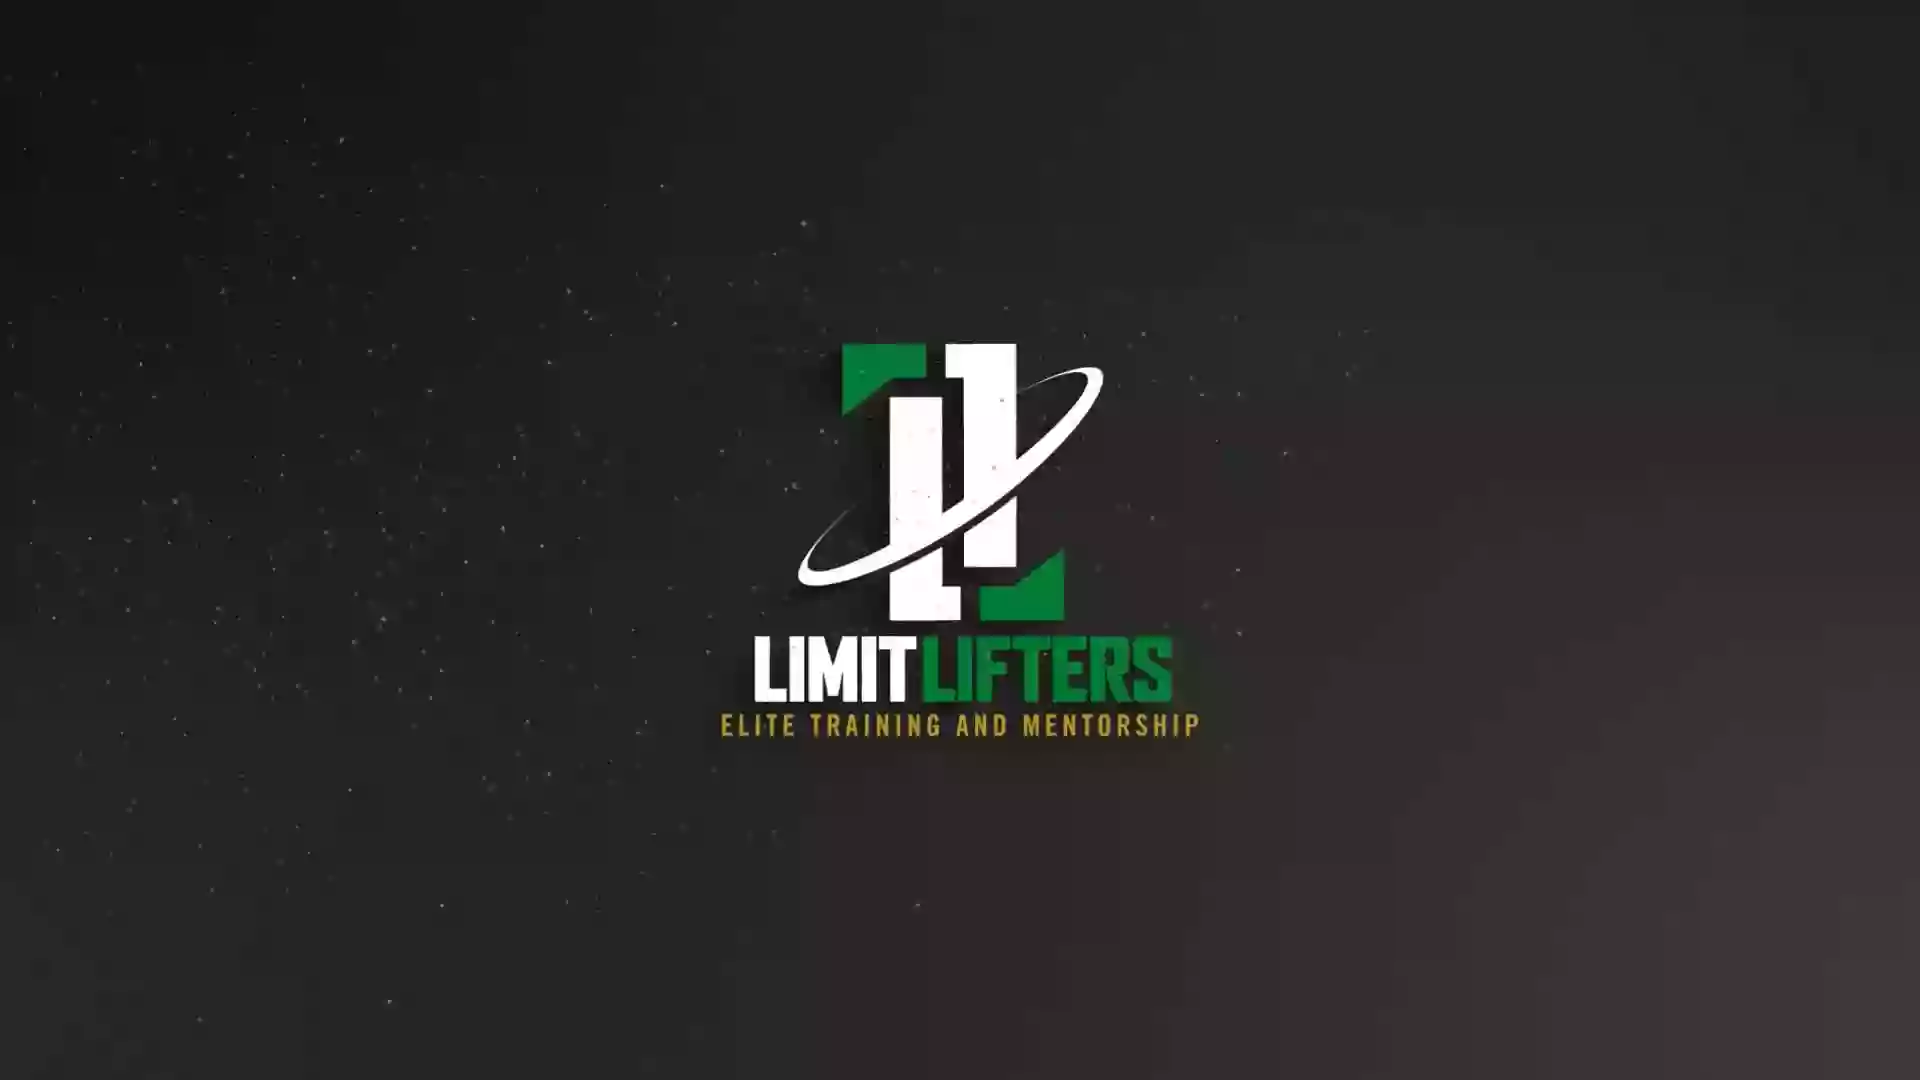 Limit Lifters Elite Training and Mentorship